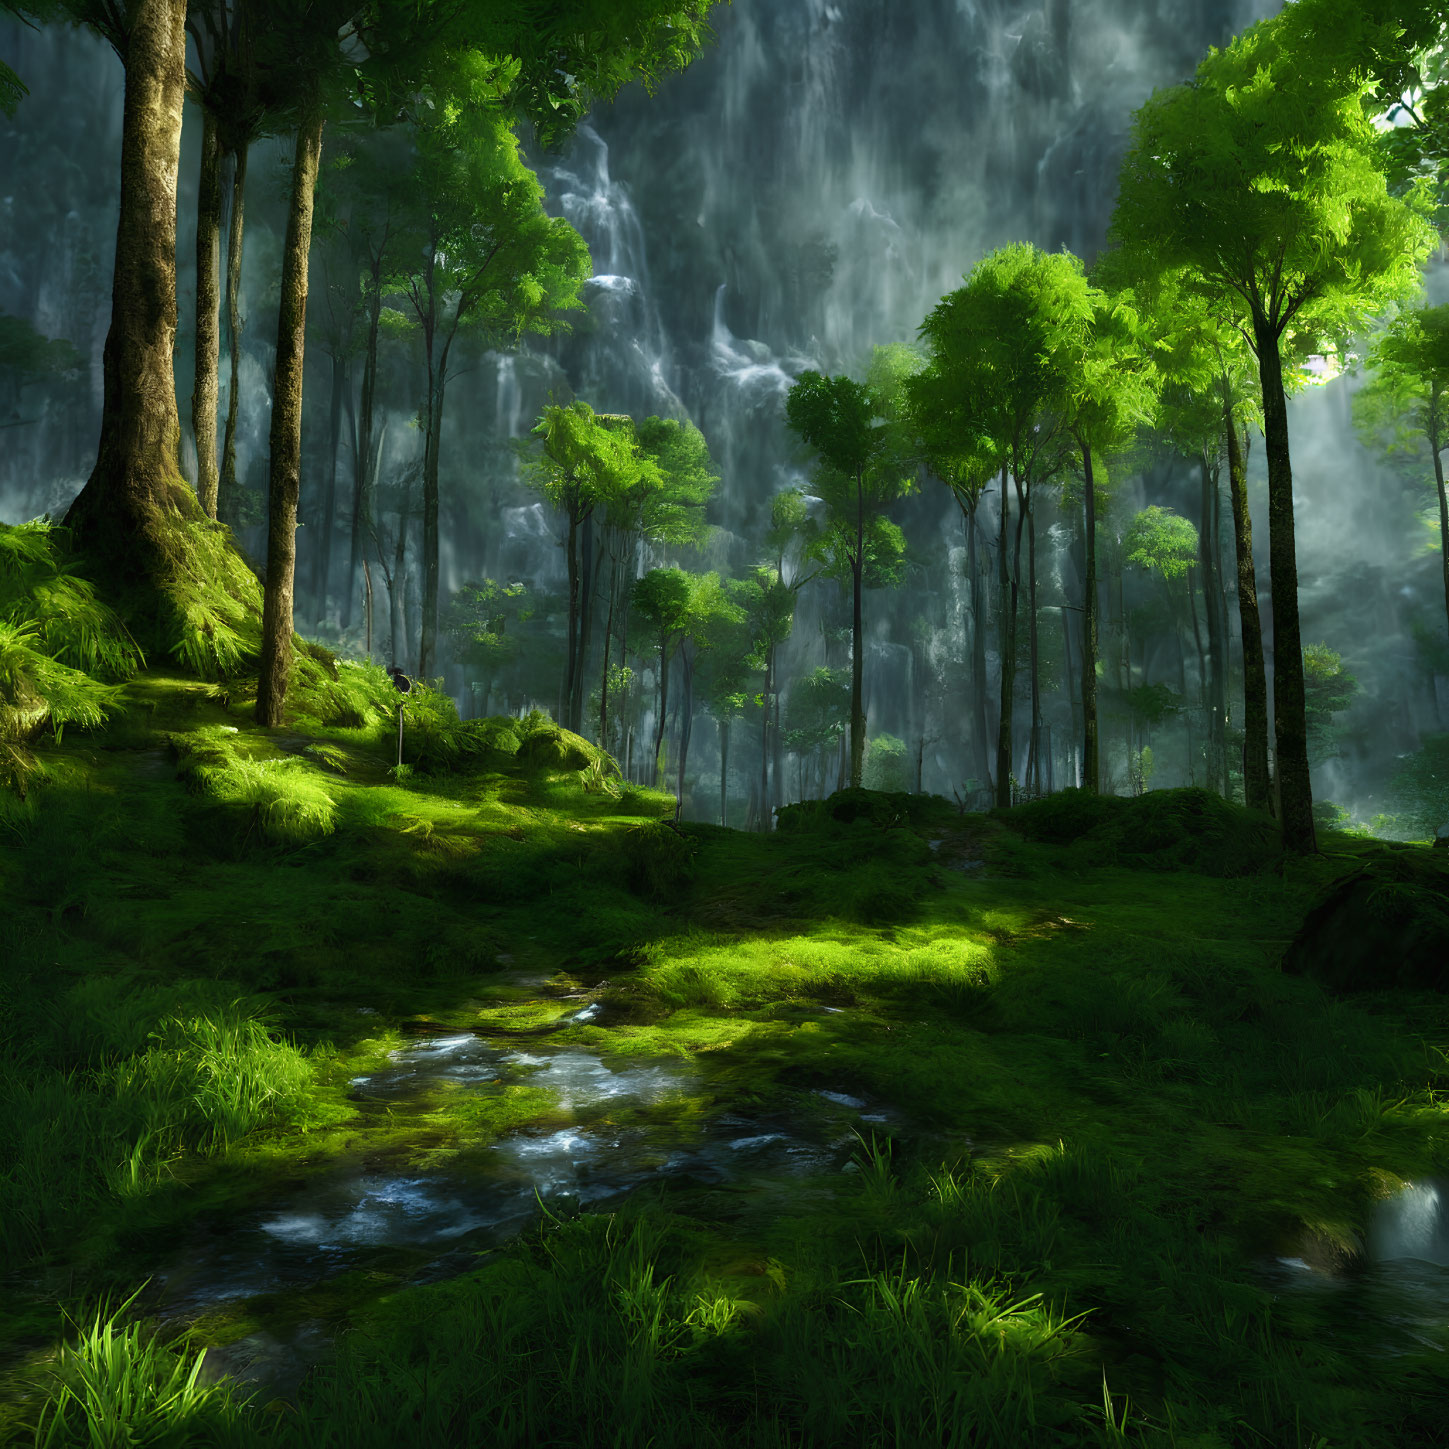 Tranquil forest scene with sunlight, stream, and waterfall